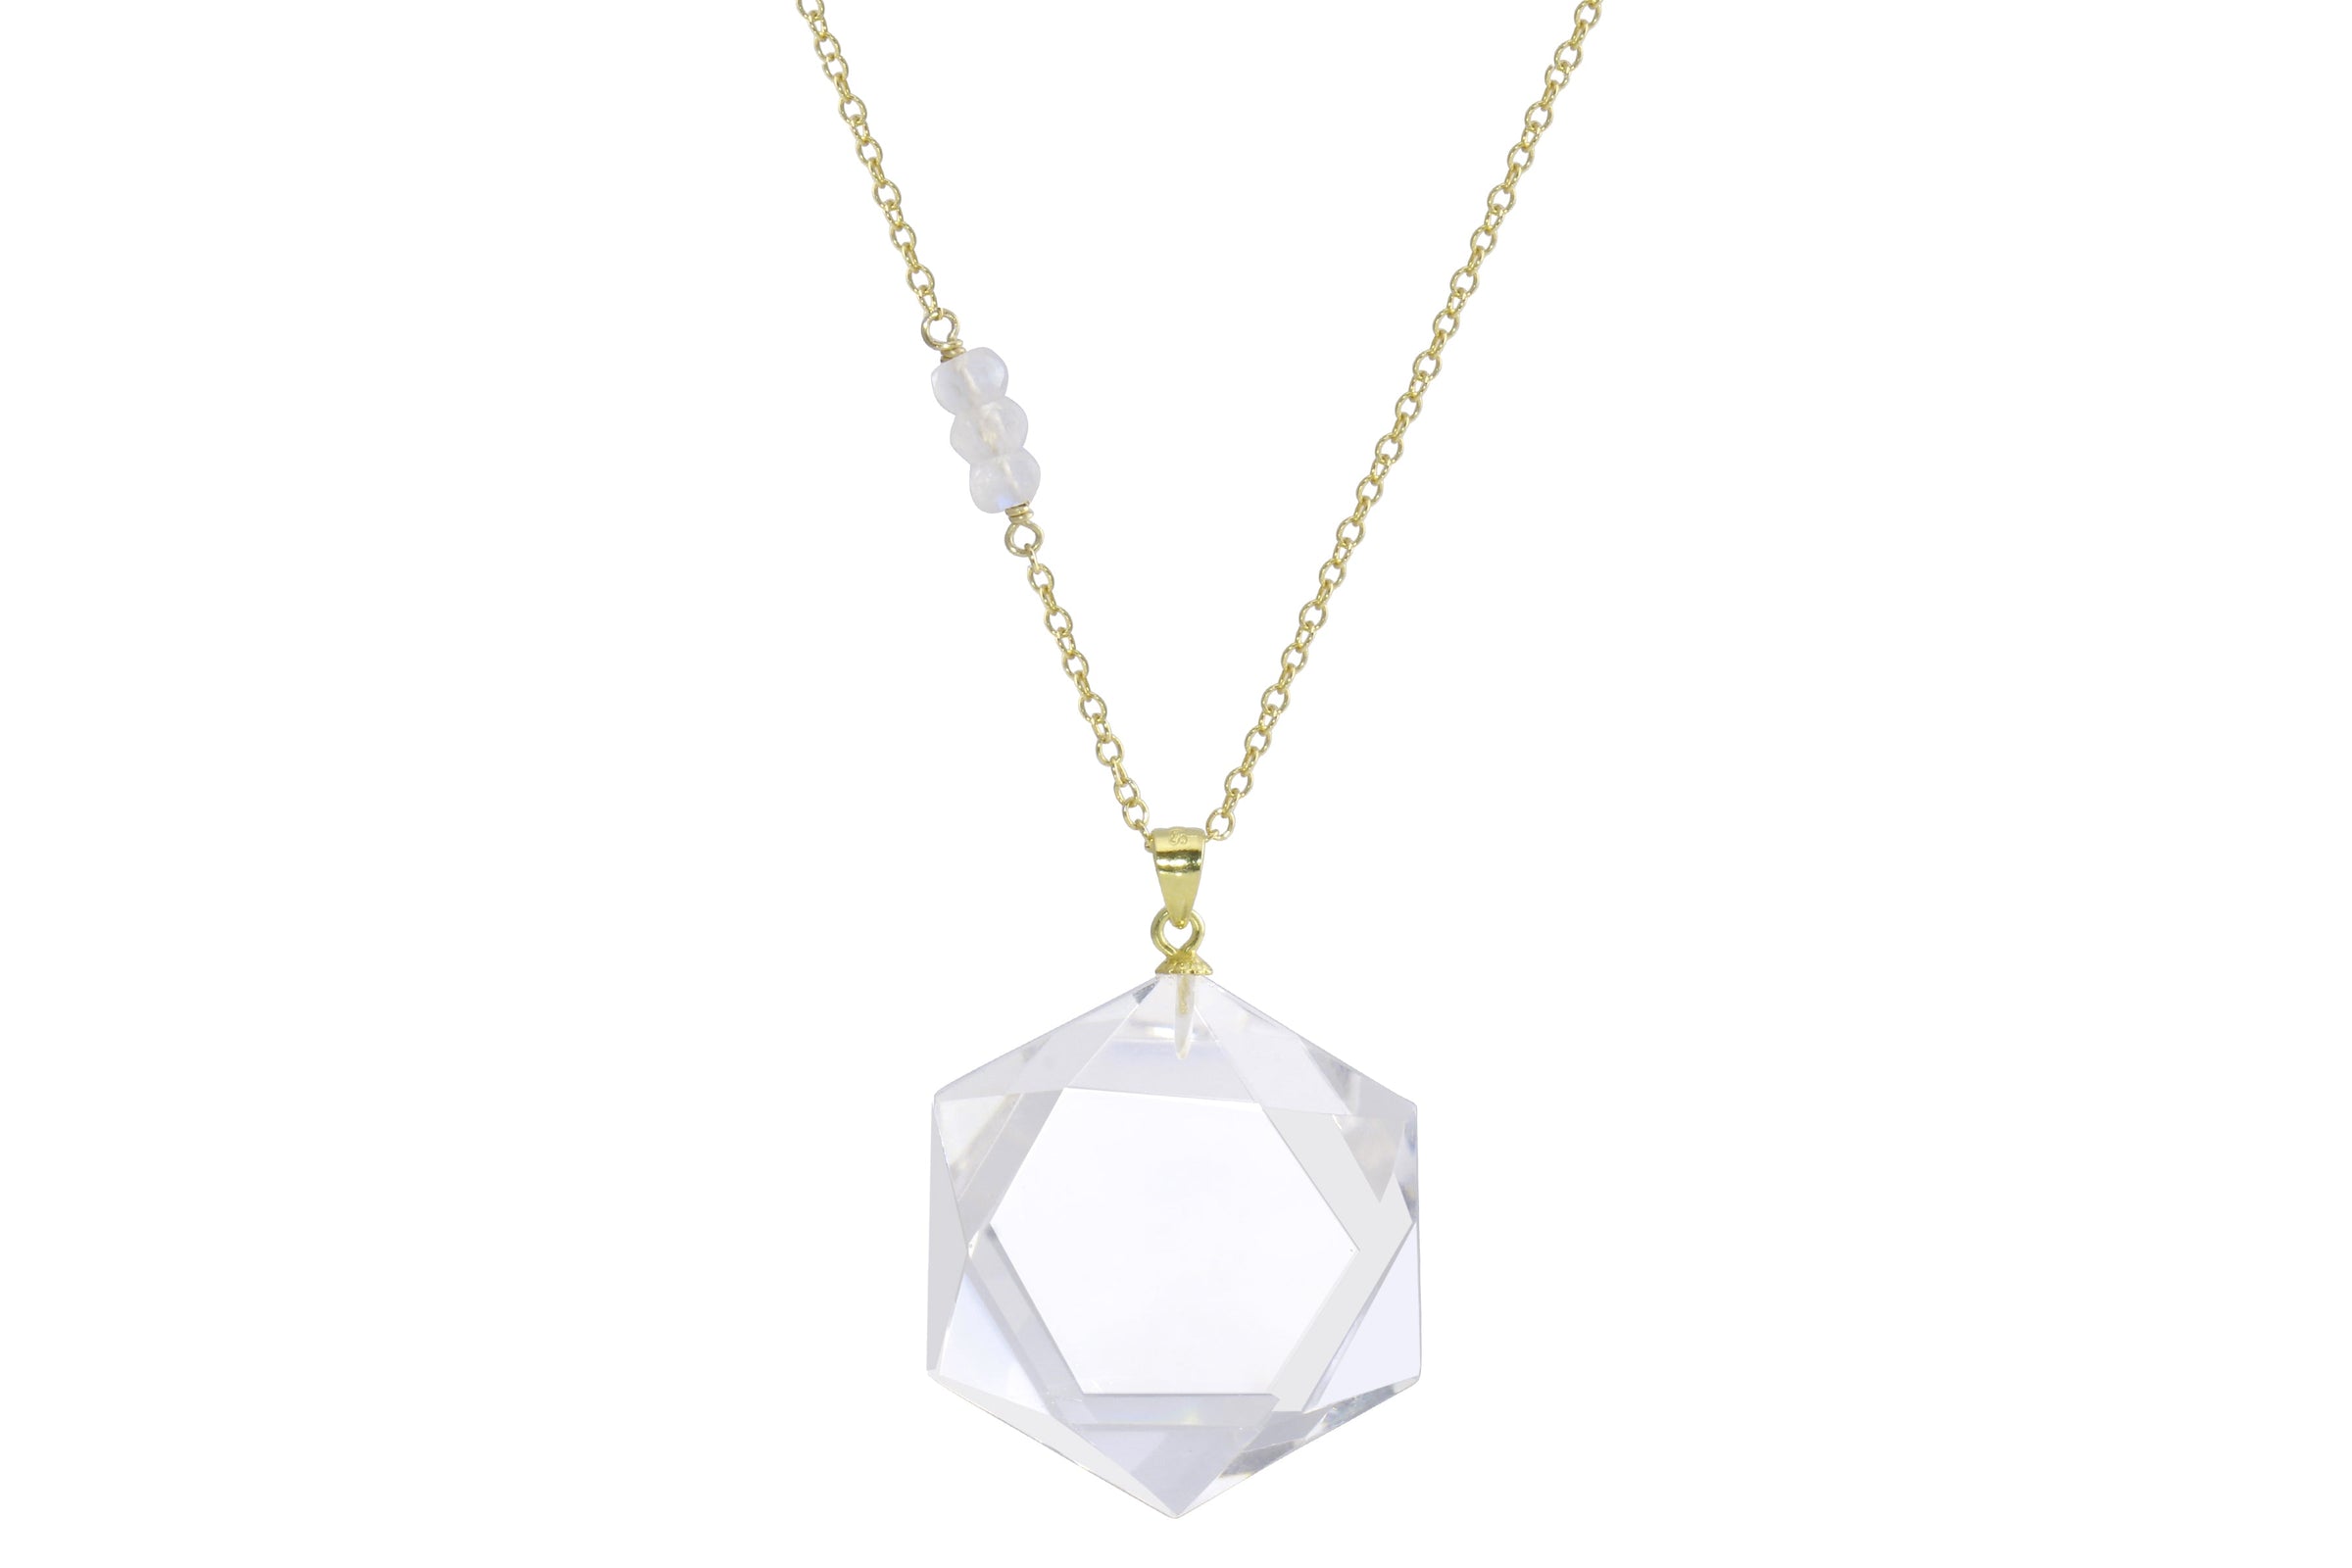 Clear Quartz Hexagon Crystal Necklace - choose sterling silver or gold filled | Aislinn Collection necklace Amanda K Lockrow